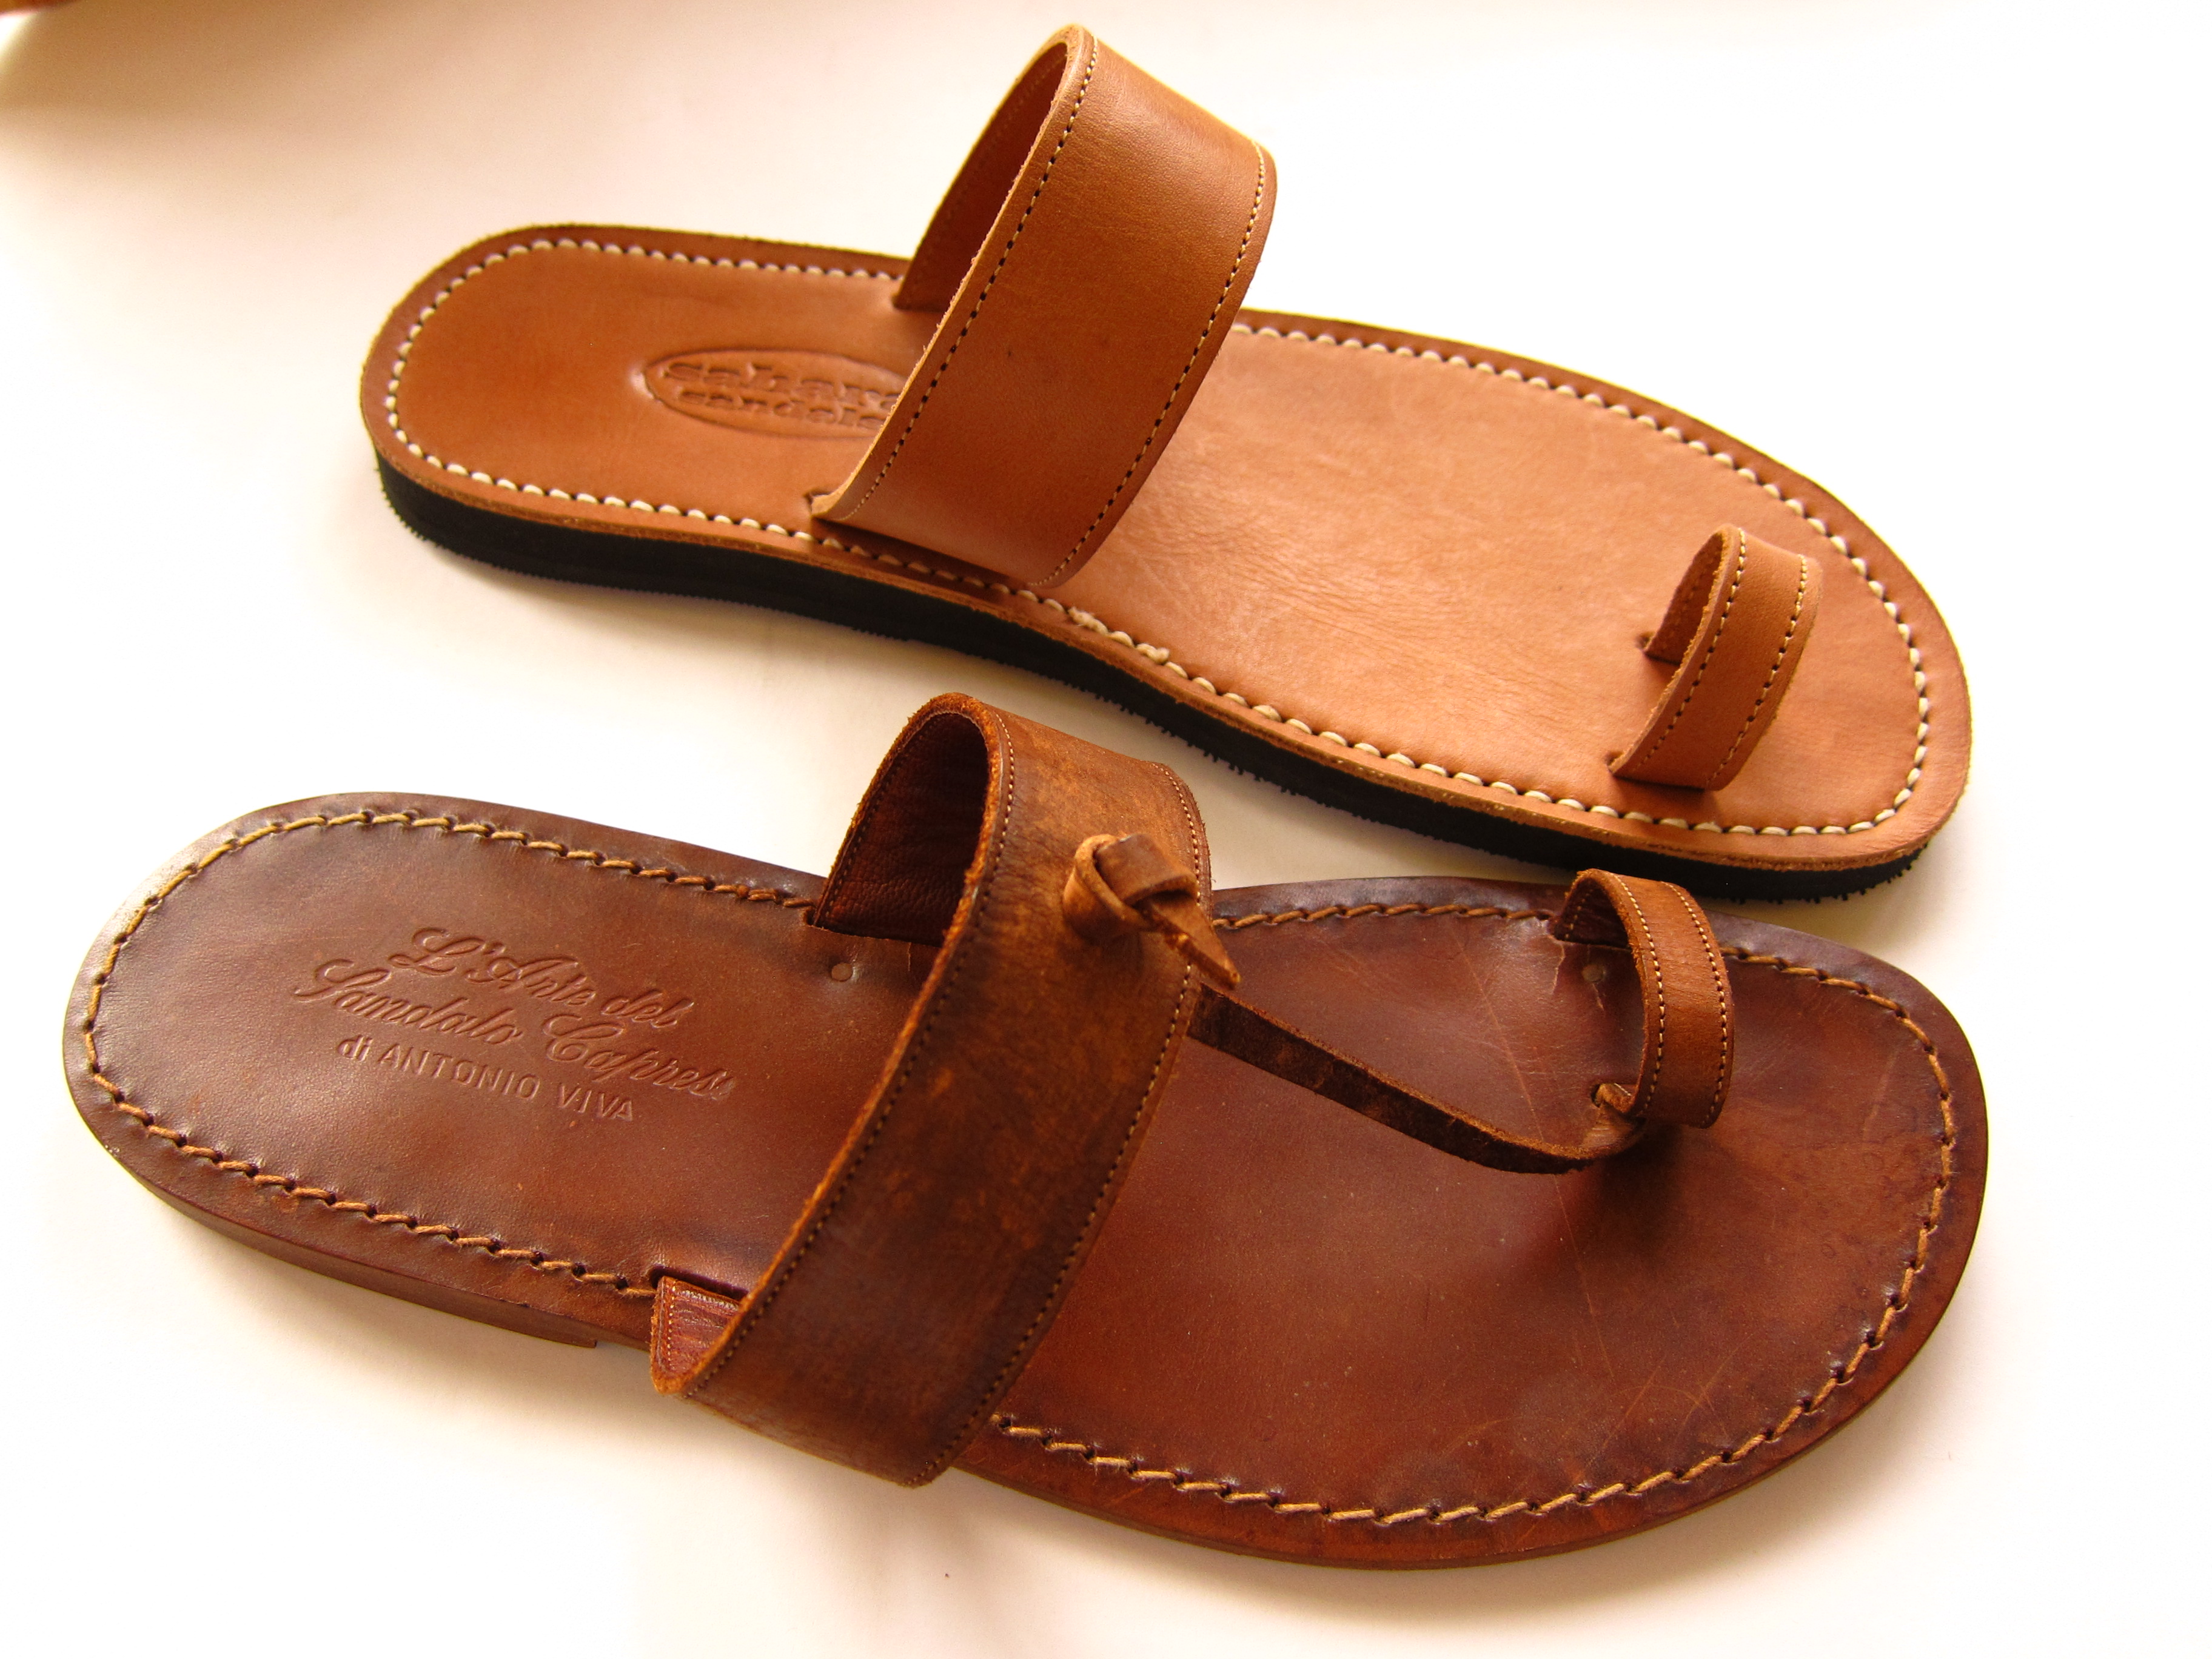 sandals made in mexico